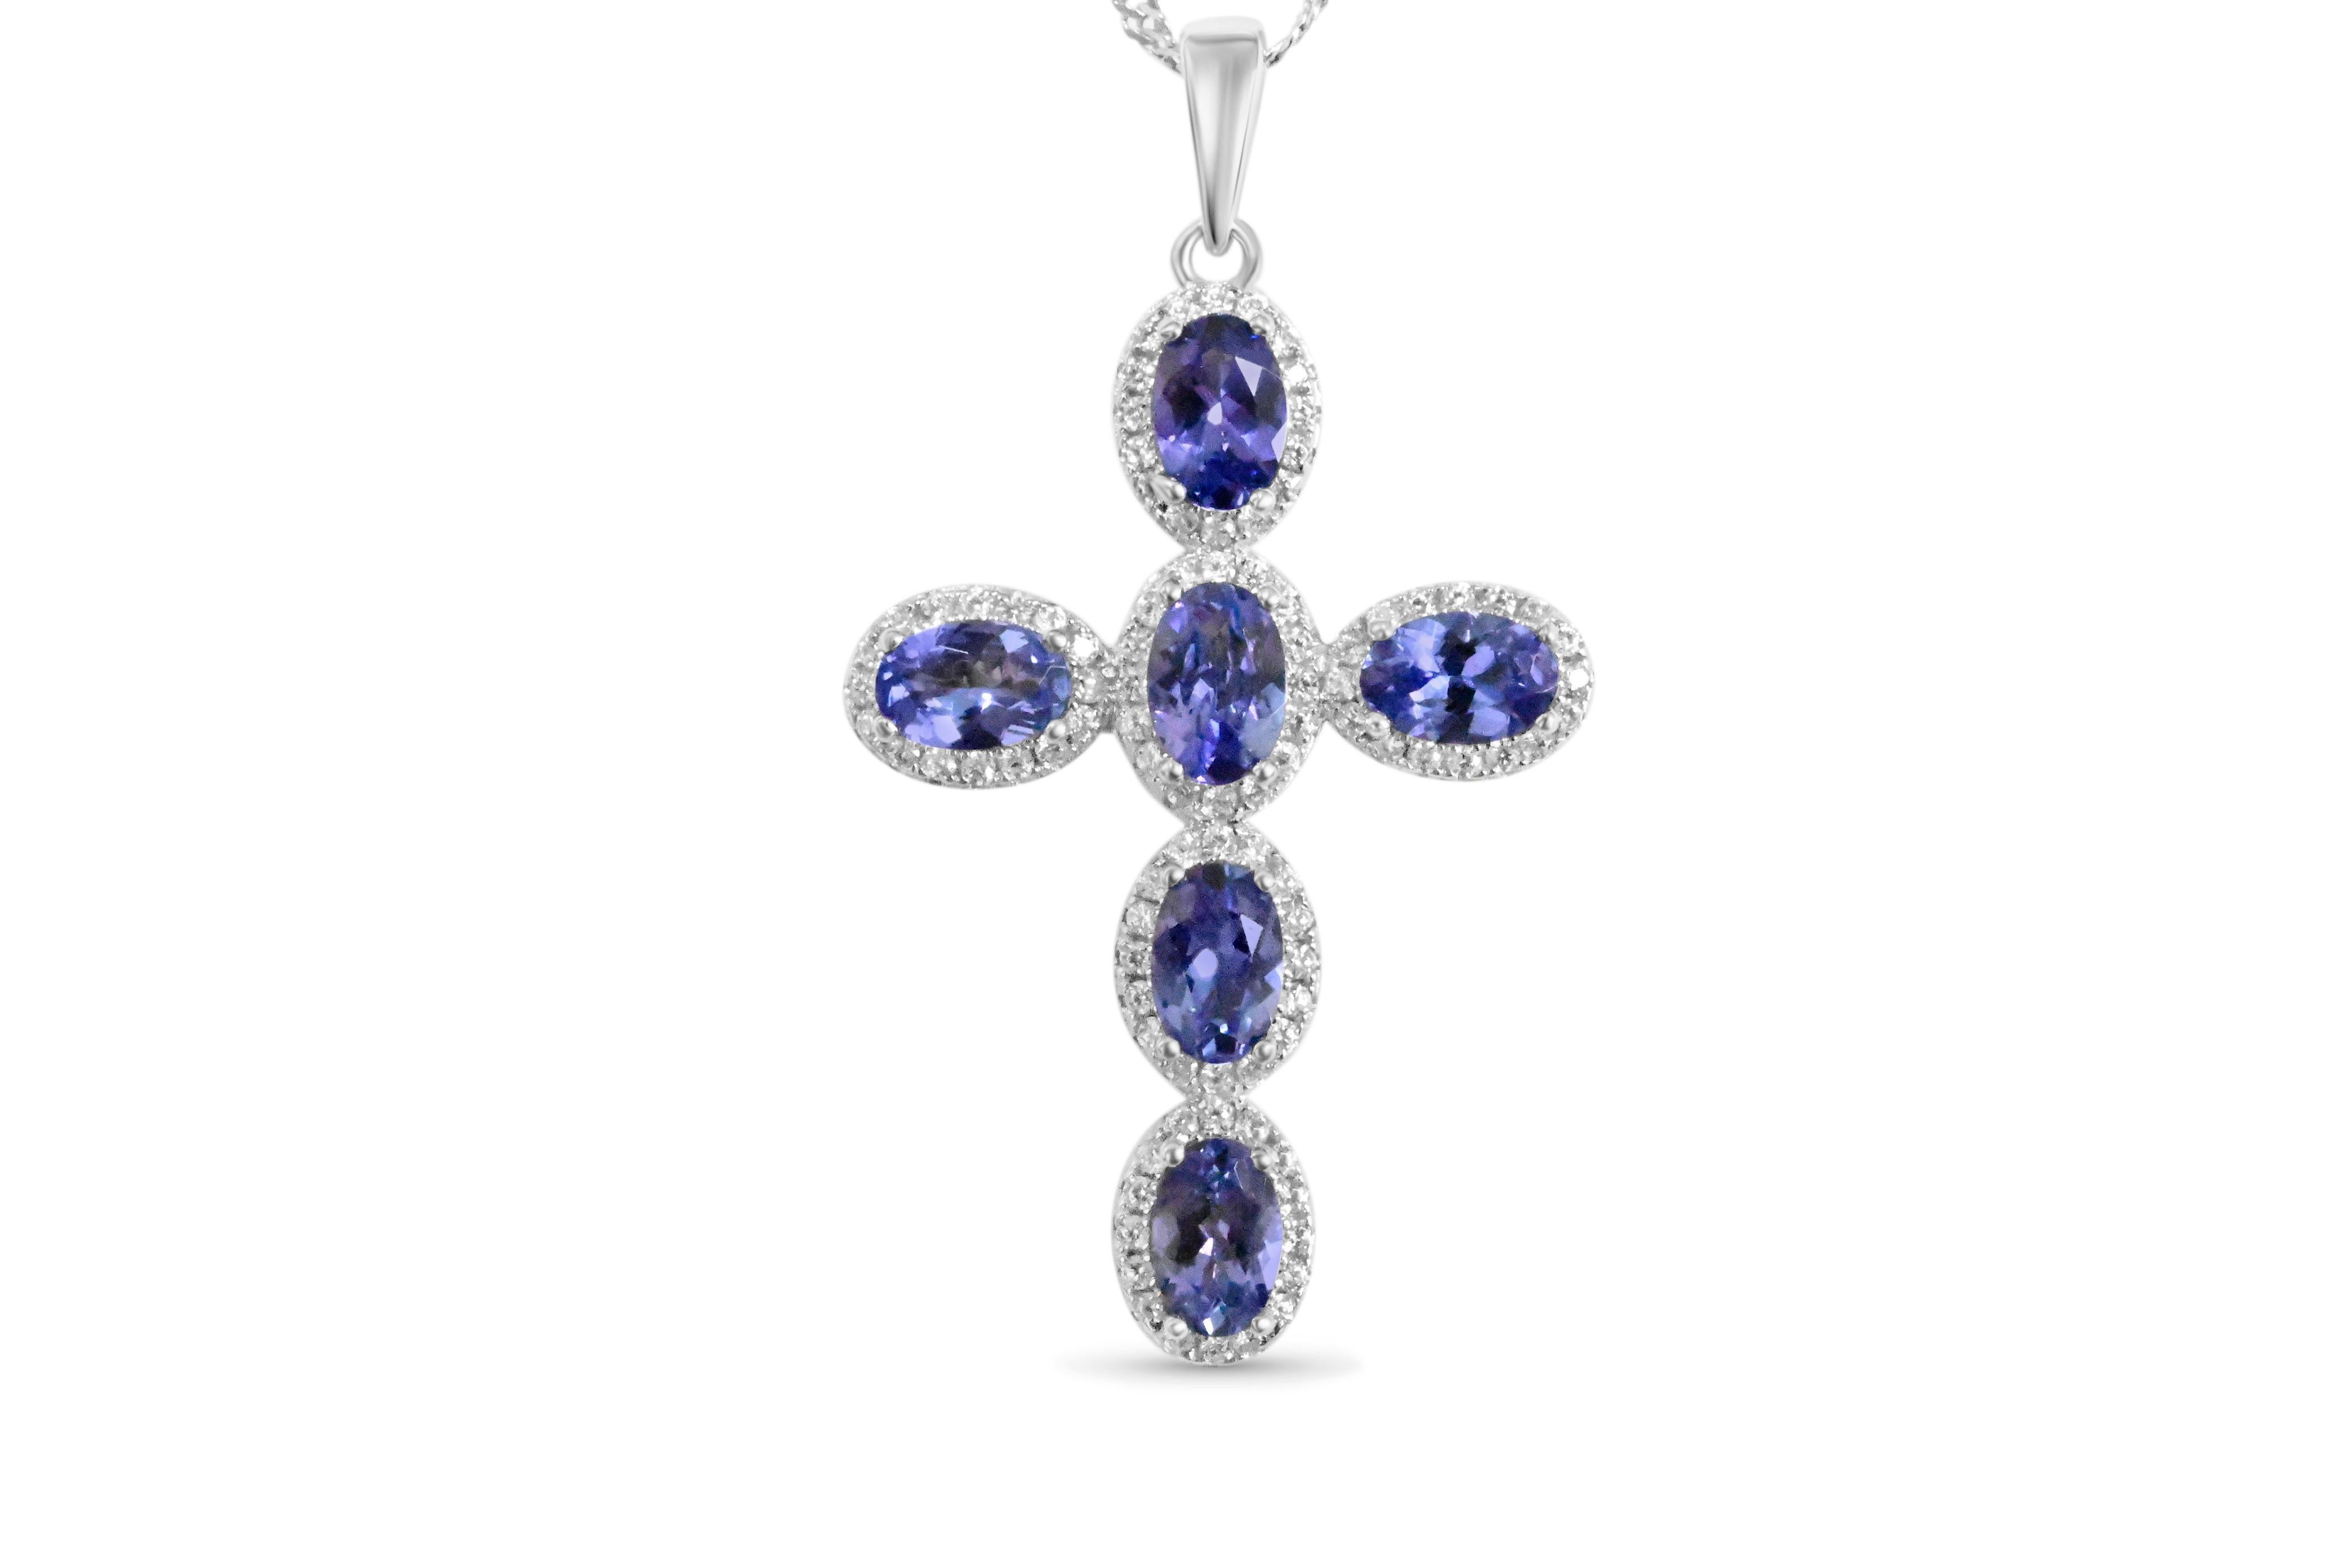 Tanzanite 925 Rhodium  Metal Platted Women's Pendant 2.70cts
Primary Stone: Tanzanite
Stone Shape: 6 x 4mm Oval
Stone Weight :2.70cts
No of Stone: 6 pieces

Secondary Stone: White CZ
No of Stone: 96 pieces